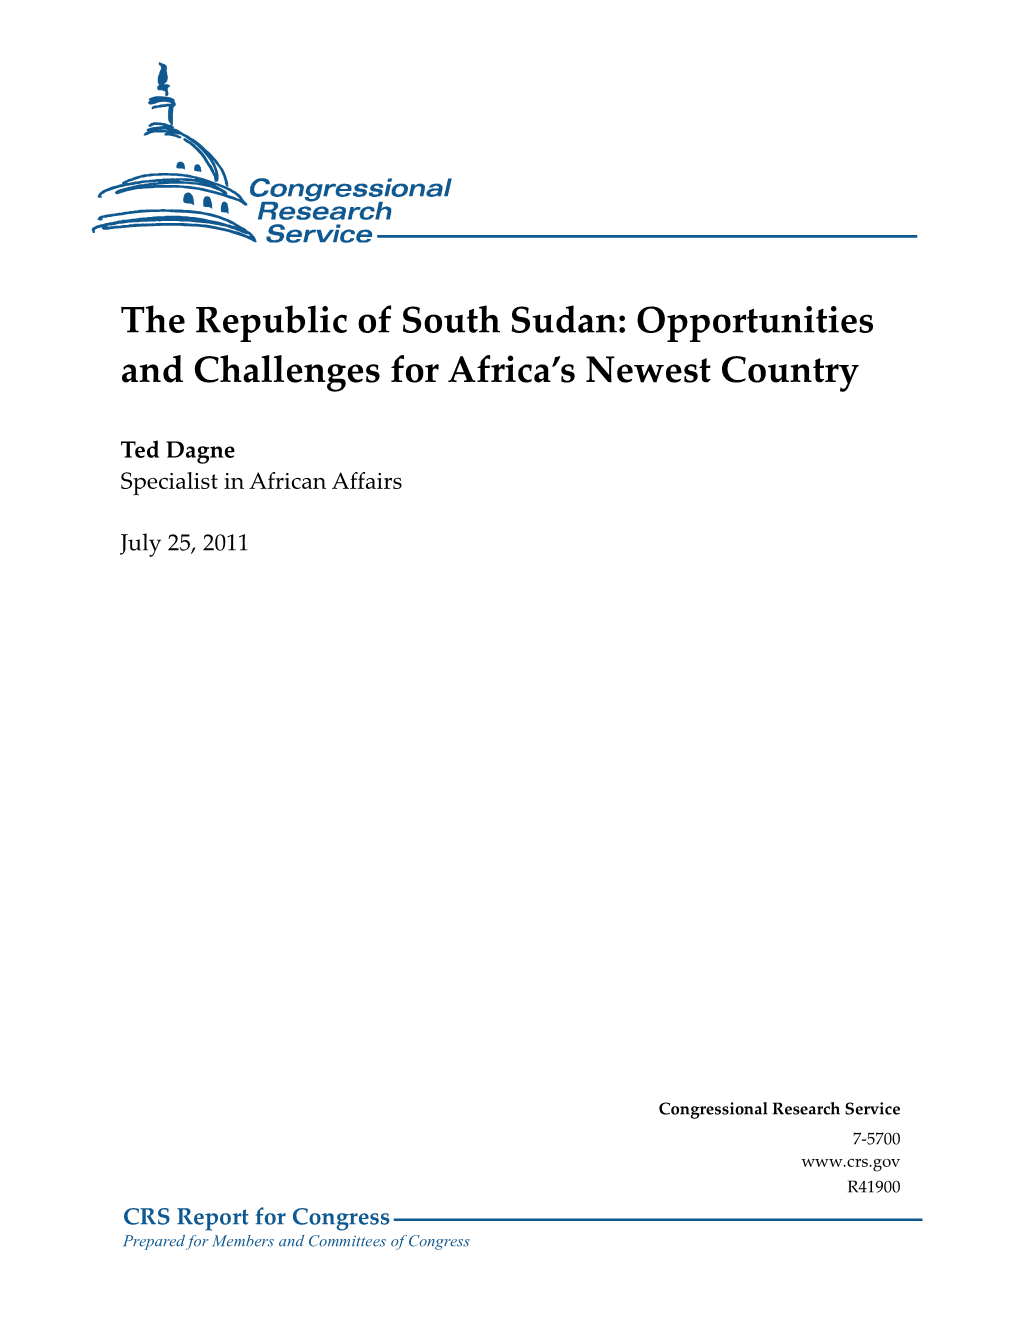 The Republic of South Sudan: Opportunities and Challenges for Africa’S Newest Country